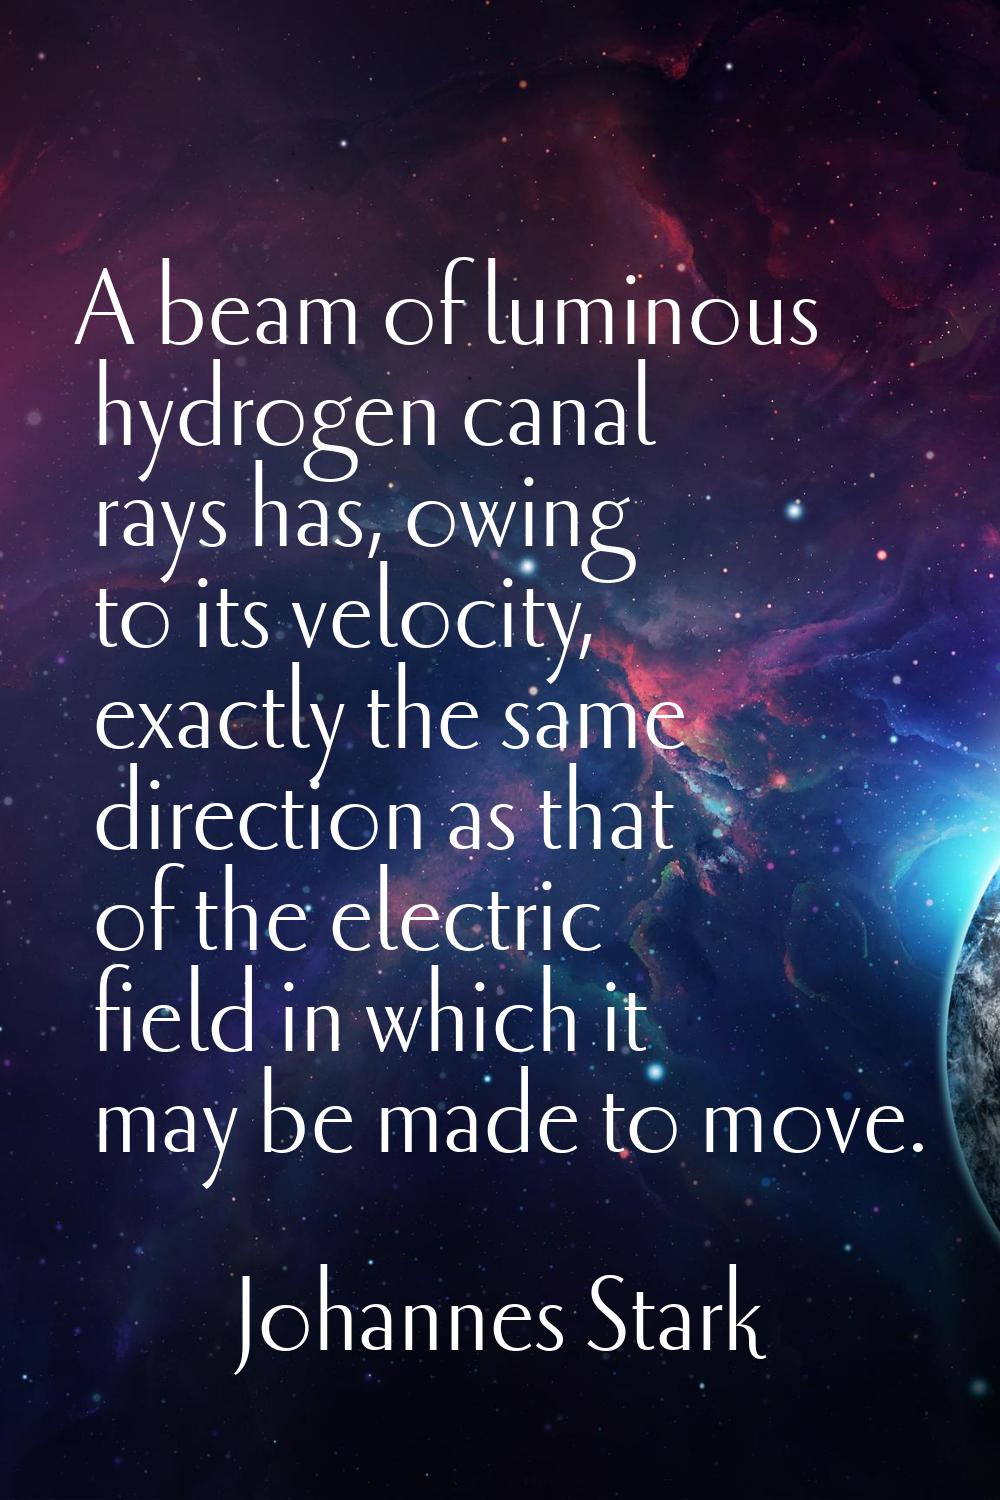 A beam of luminous hydrogen canal rays has, owing to its velocity, exactly the same direction as th